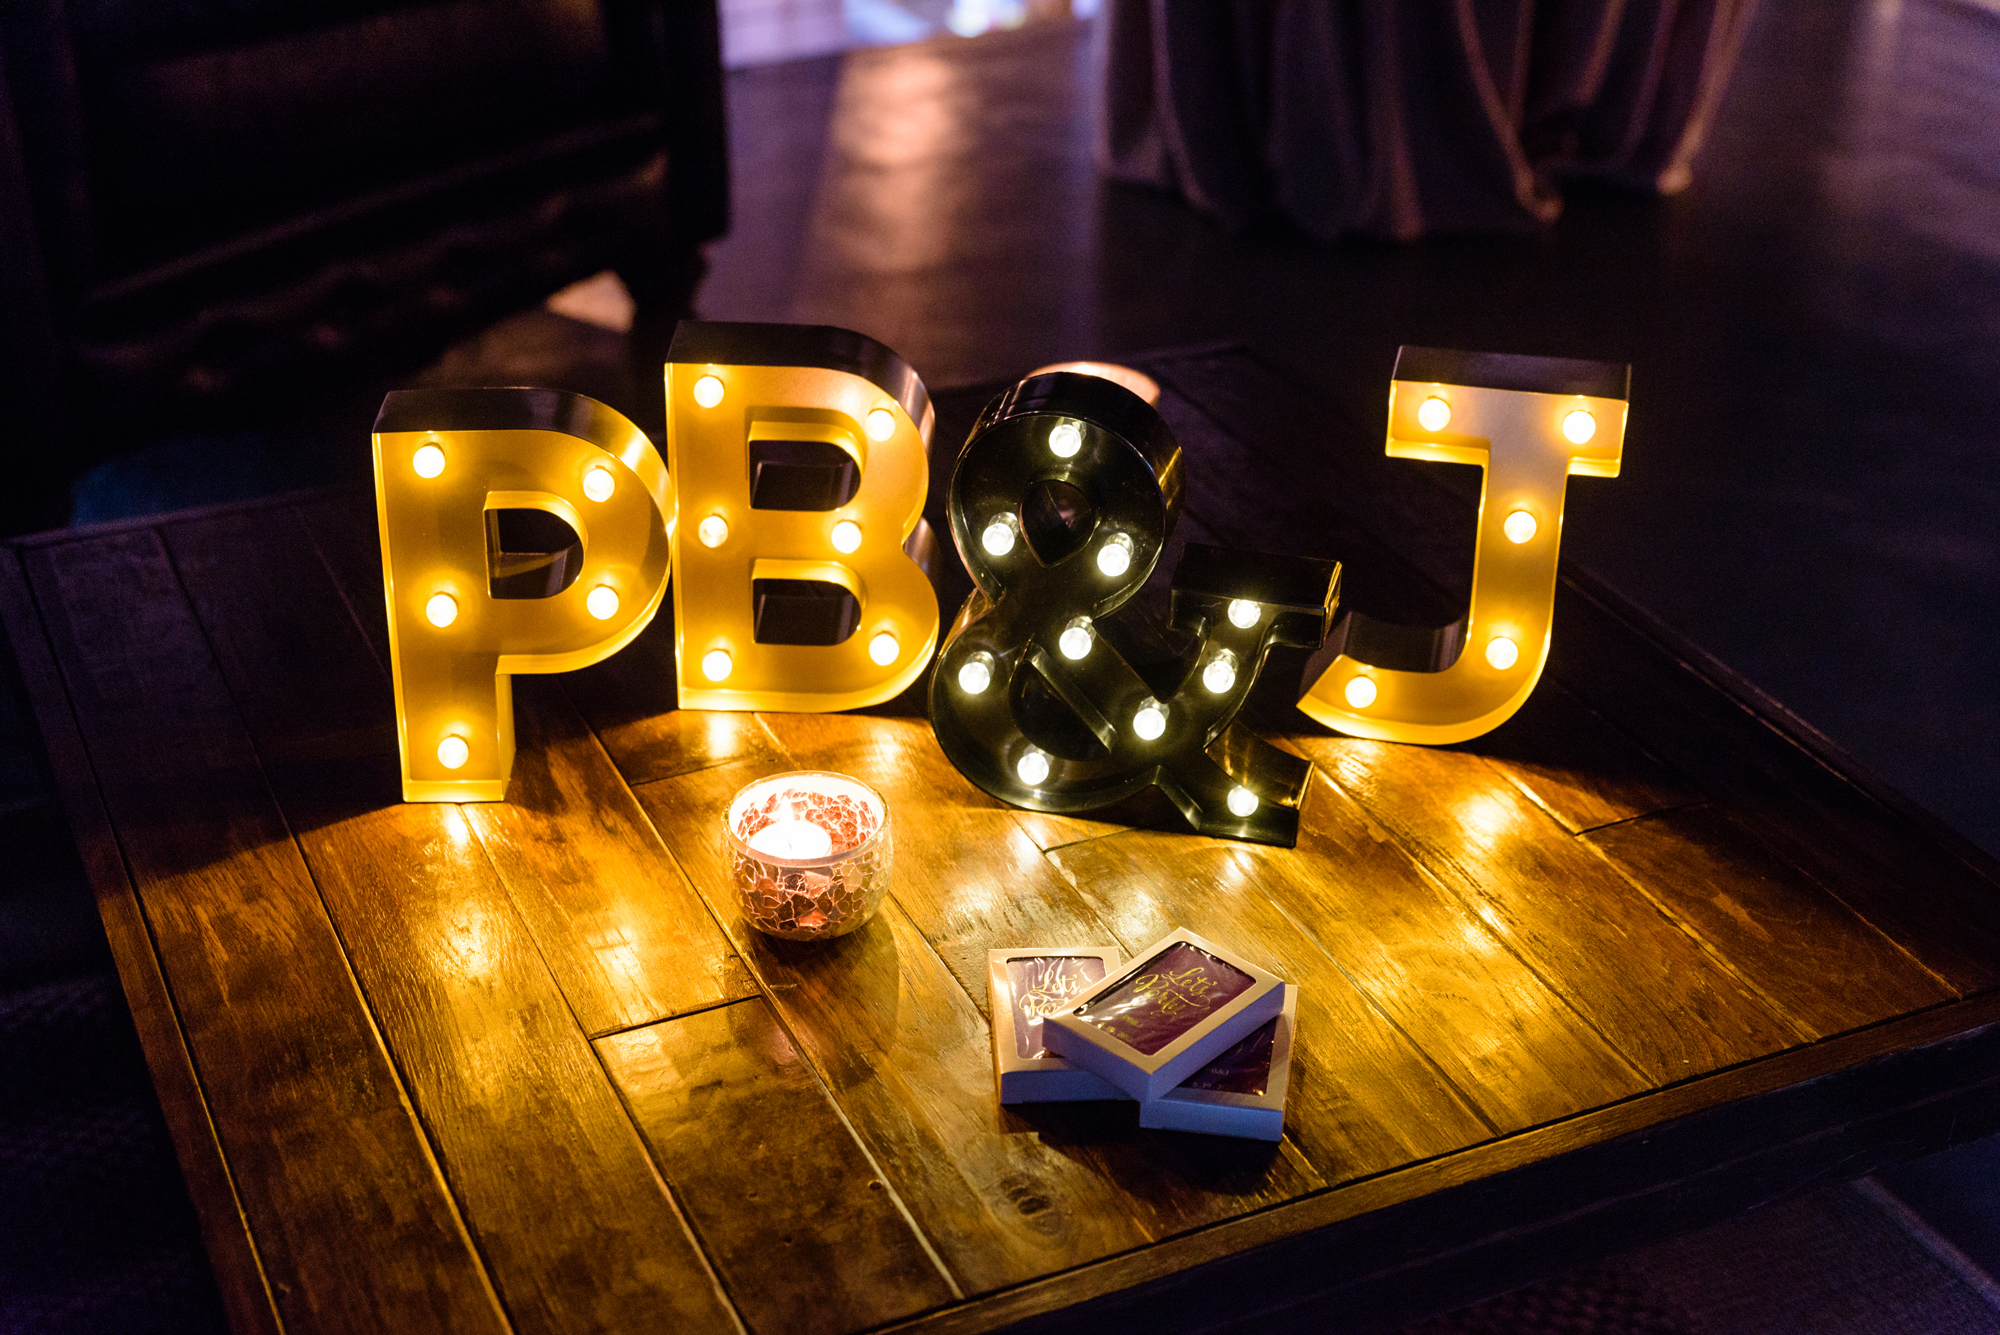 Havana Nights themed wedding reception at The Brick by MichaelAngelos Events PB&J marquee letters